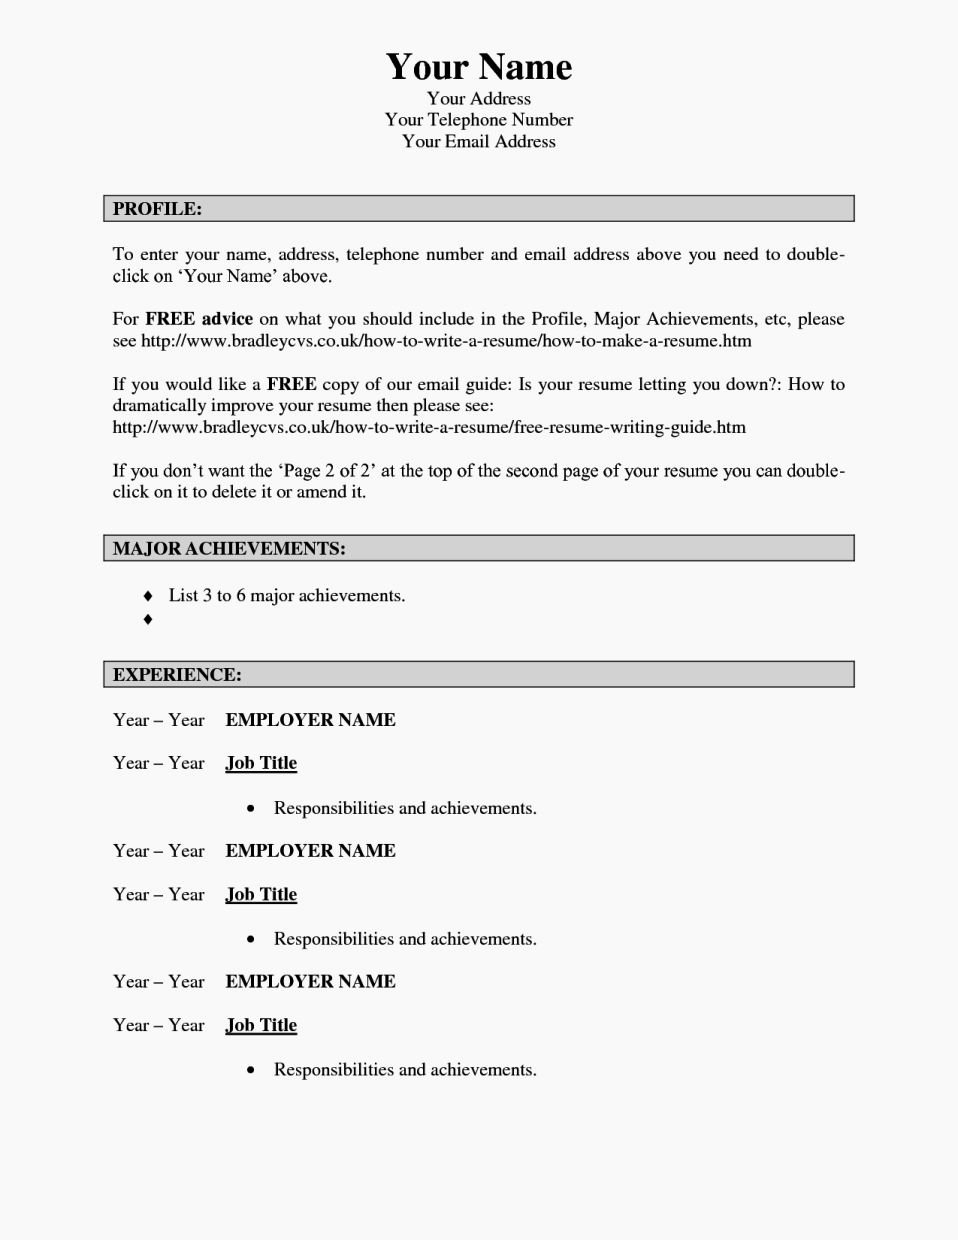 Examples How to Make A Resume